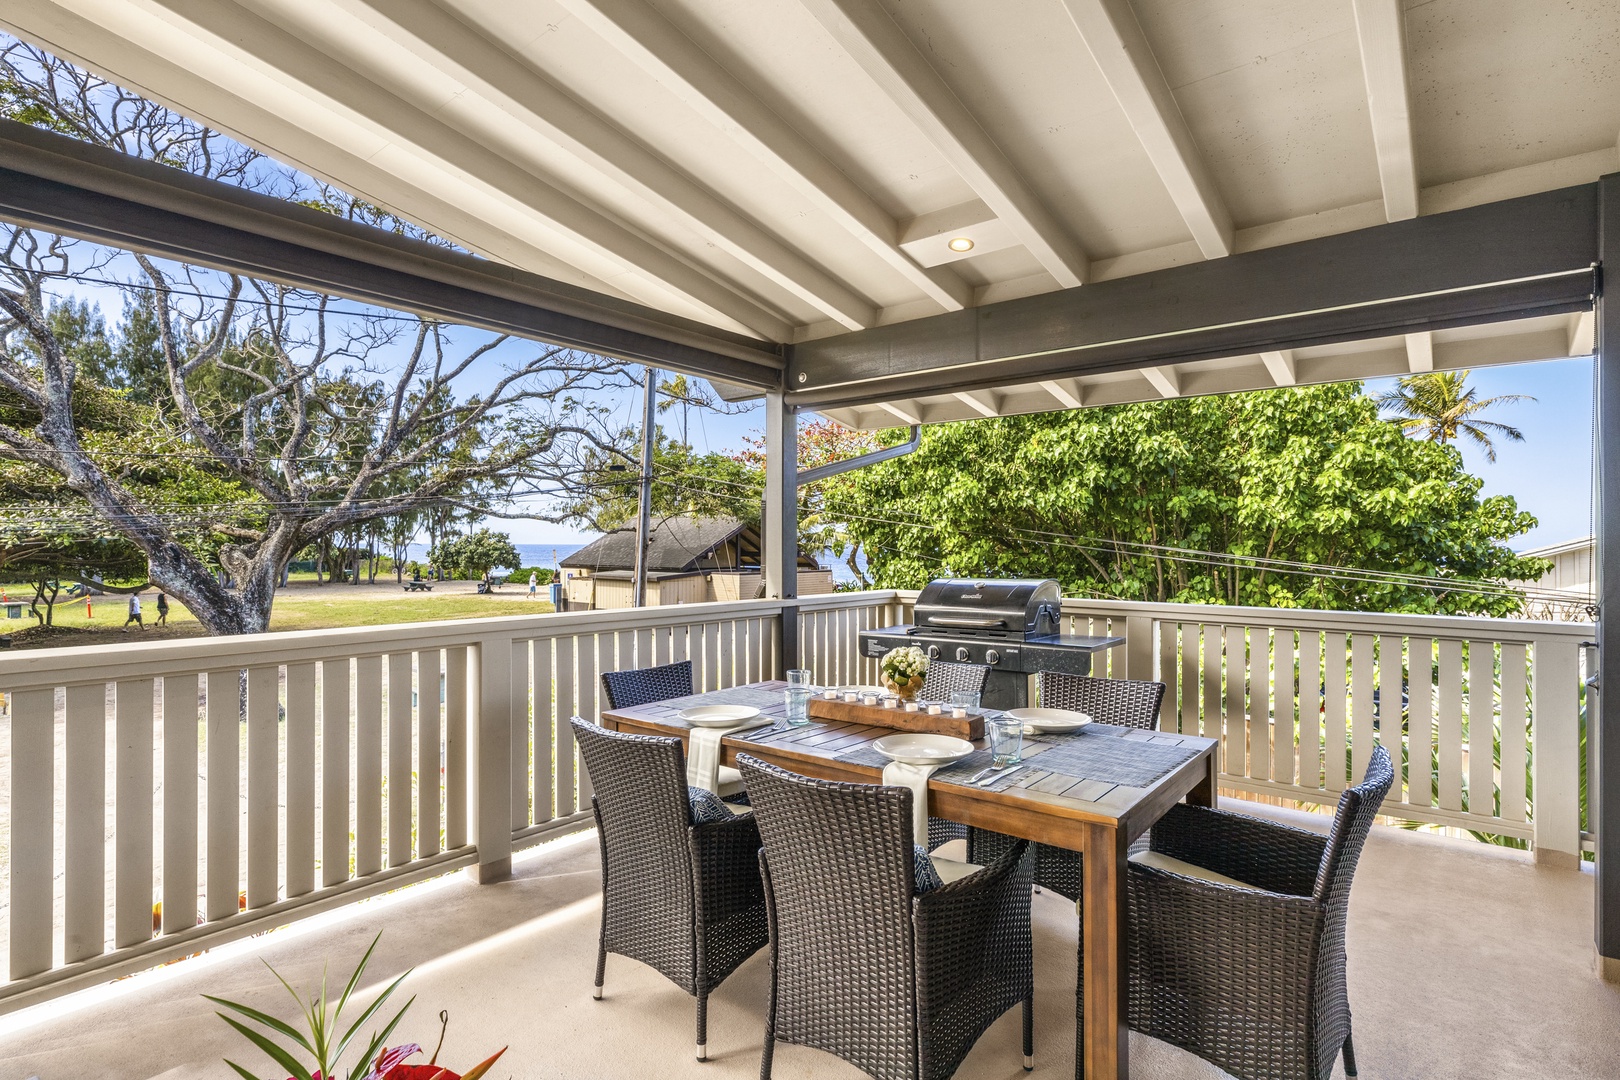 Haleiwa Vacation Rentals, Ehukai Beach Hale - Dining area with ocean and park view